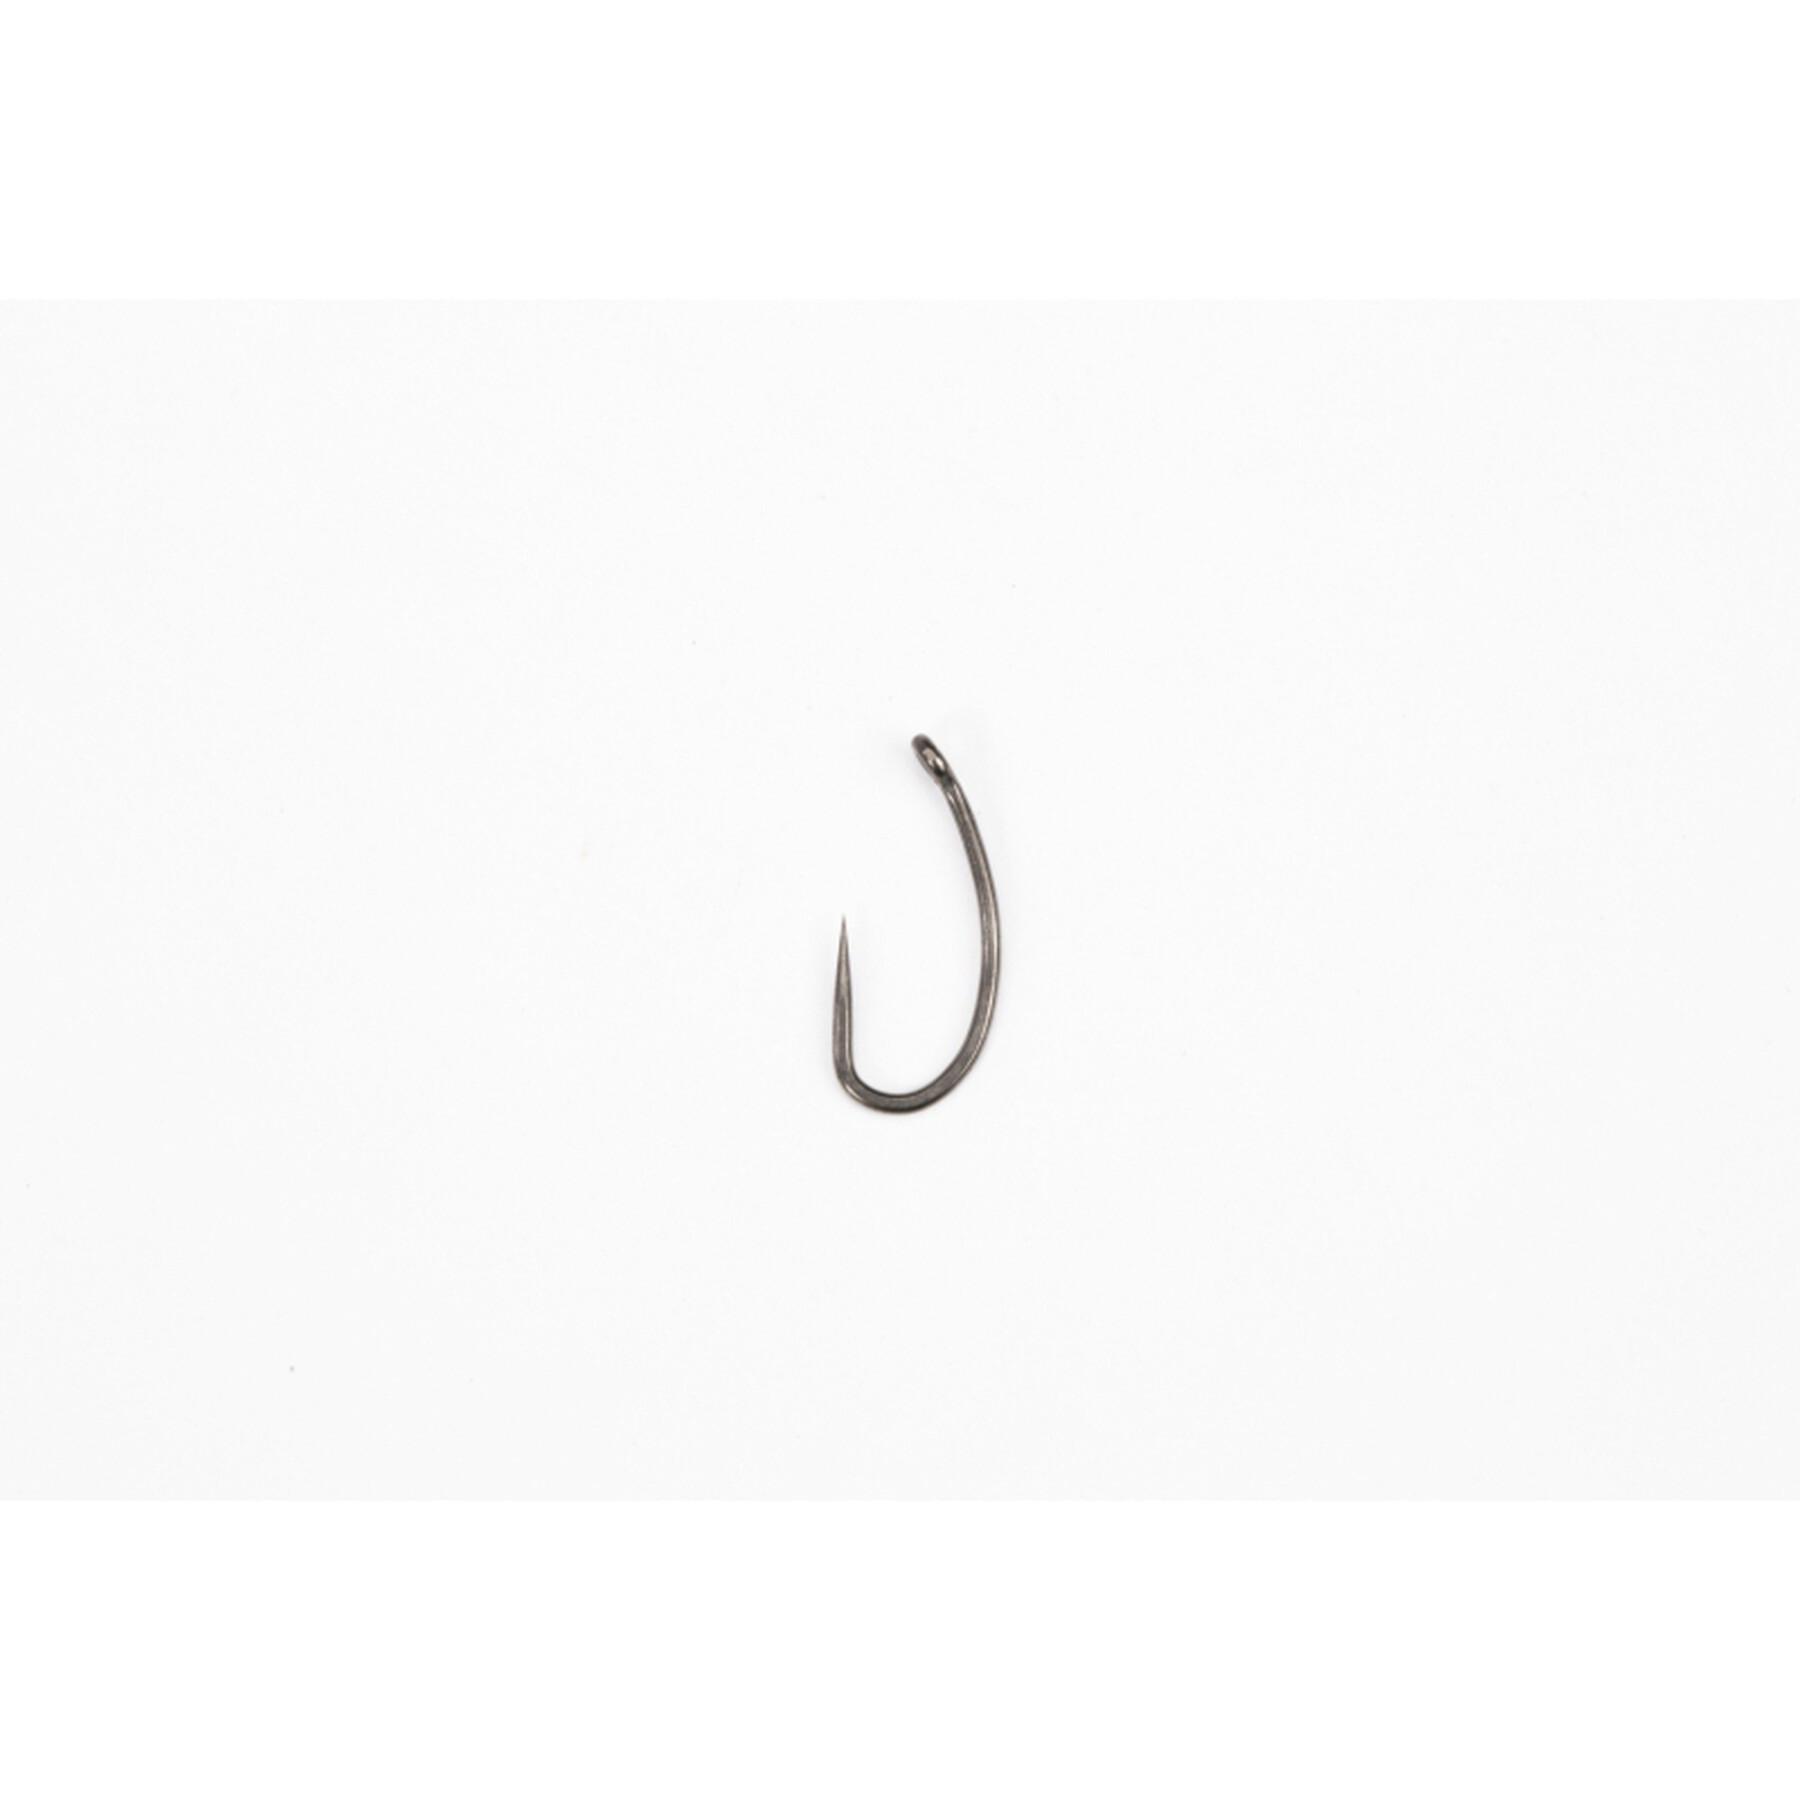 Hook Pinpoint Fang X size 7 Micro Barbed